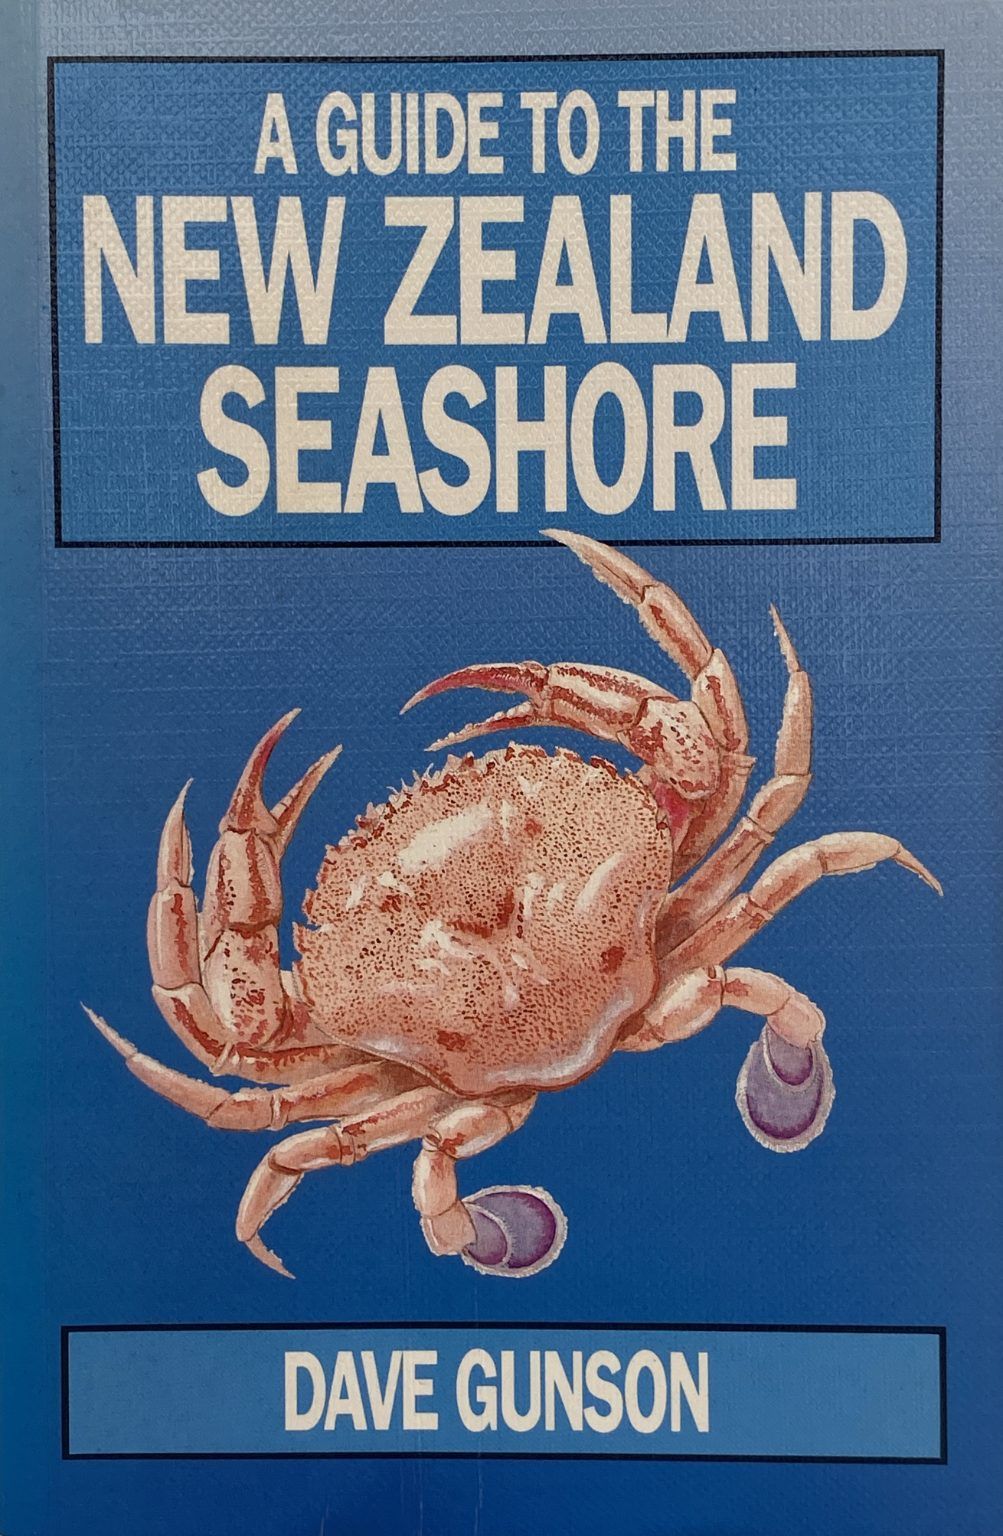 A GUIDE TO THE NEW ZEALAND SEASHORE